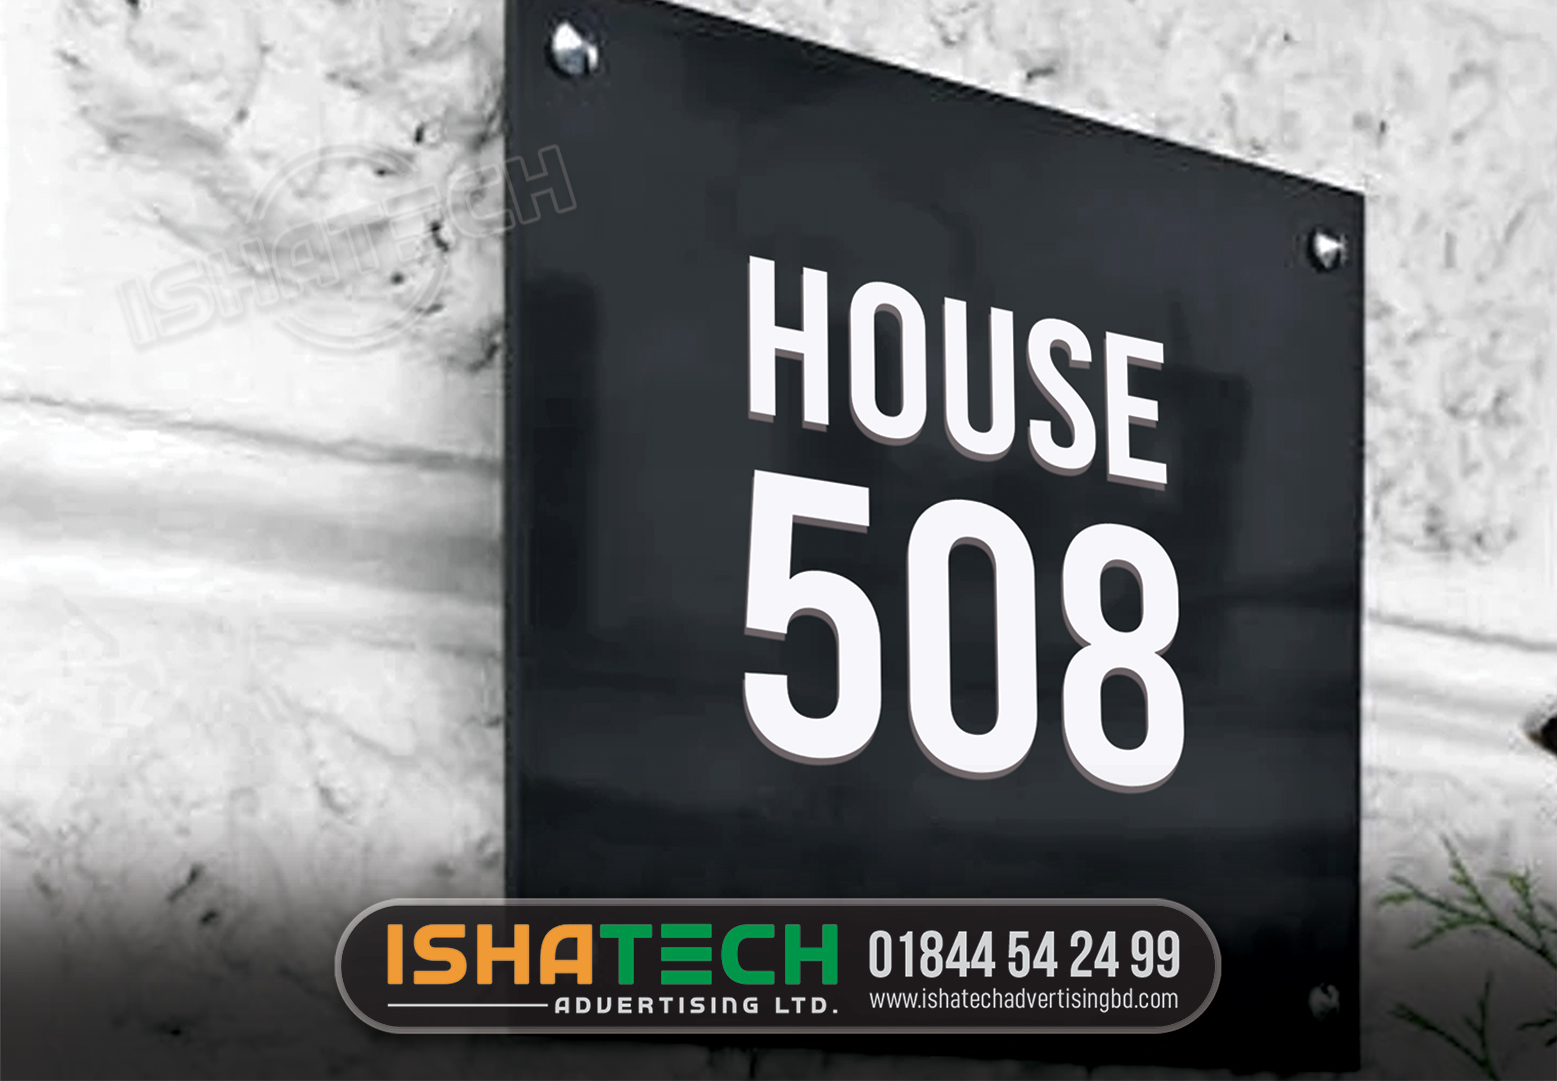 HOUSE 508 GLASS NAMEPLATE BD, BLACK AND WHITE COLOR NAMEPLATE